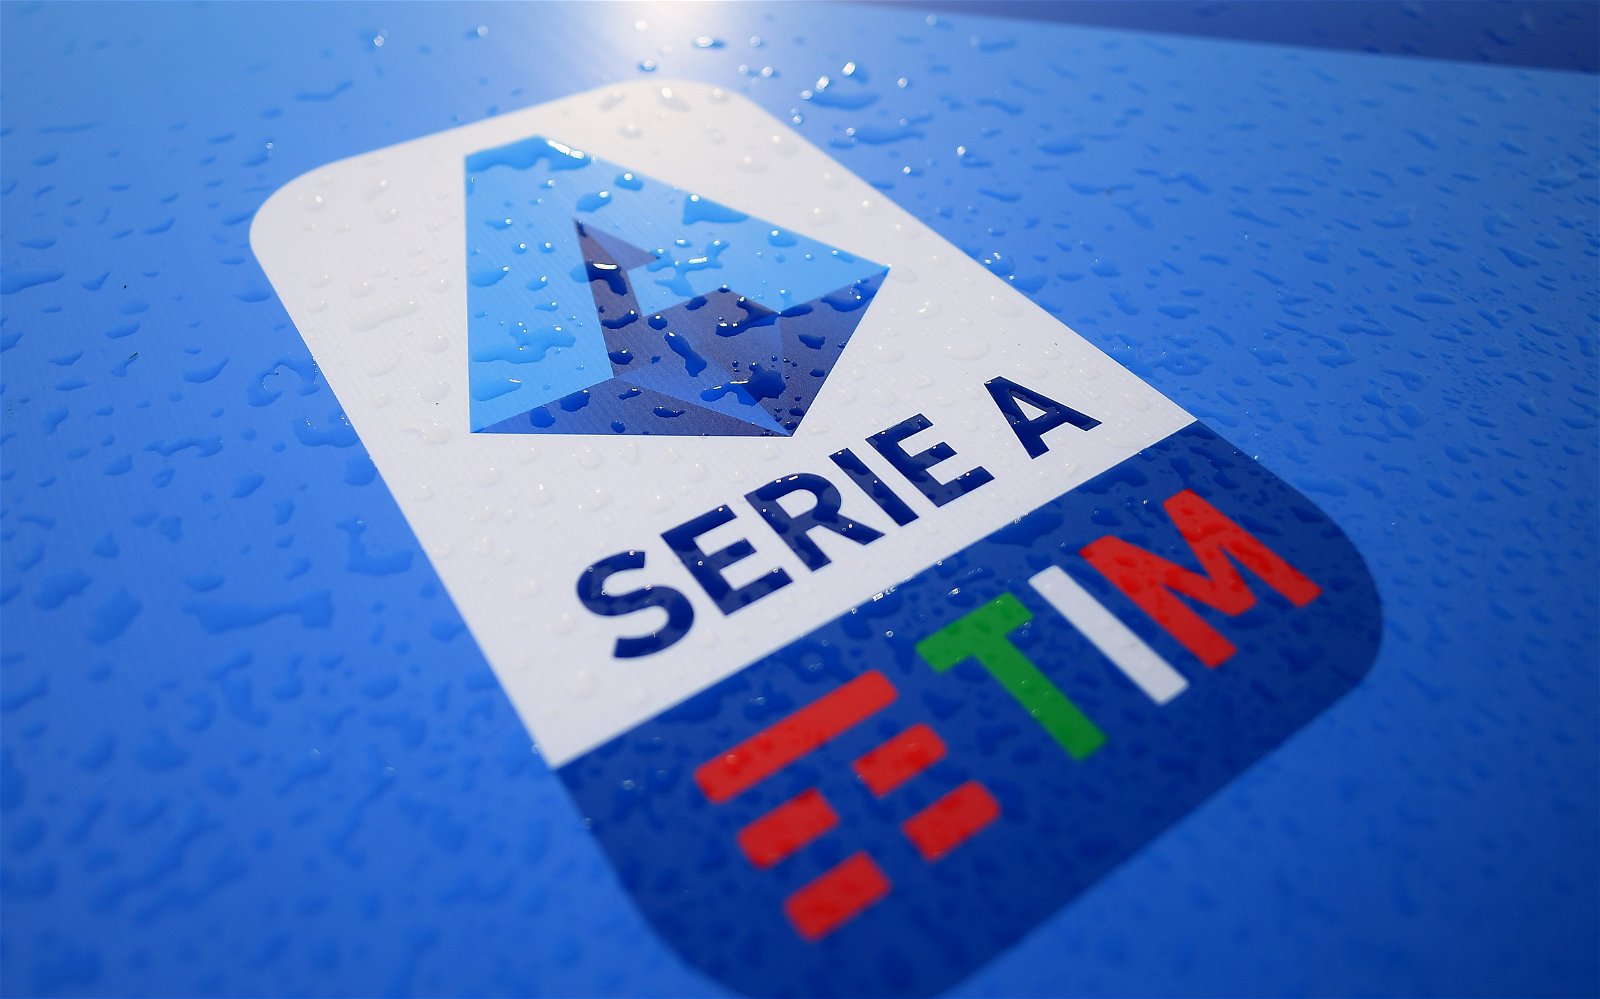 Top 10 most successful Serie A clubs 21